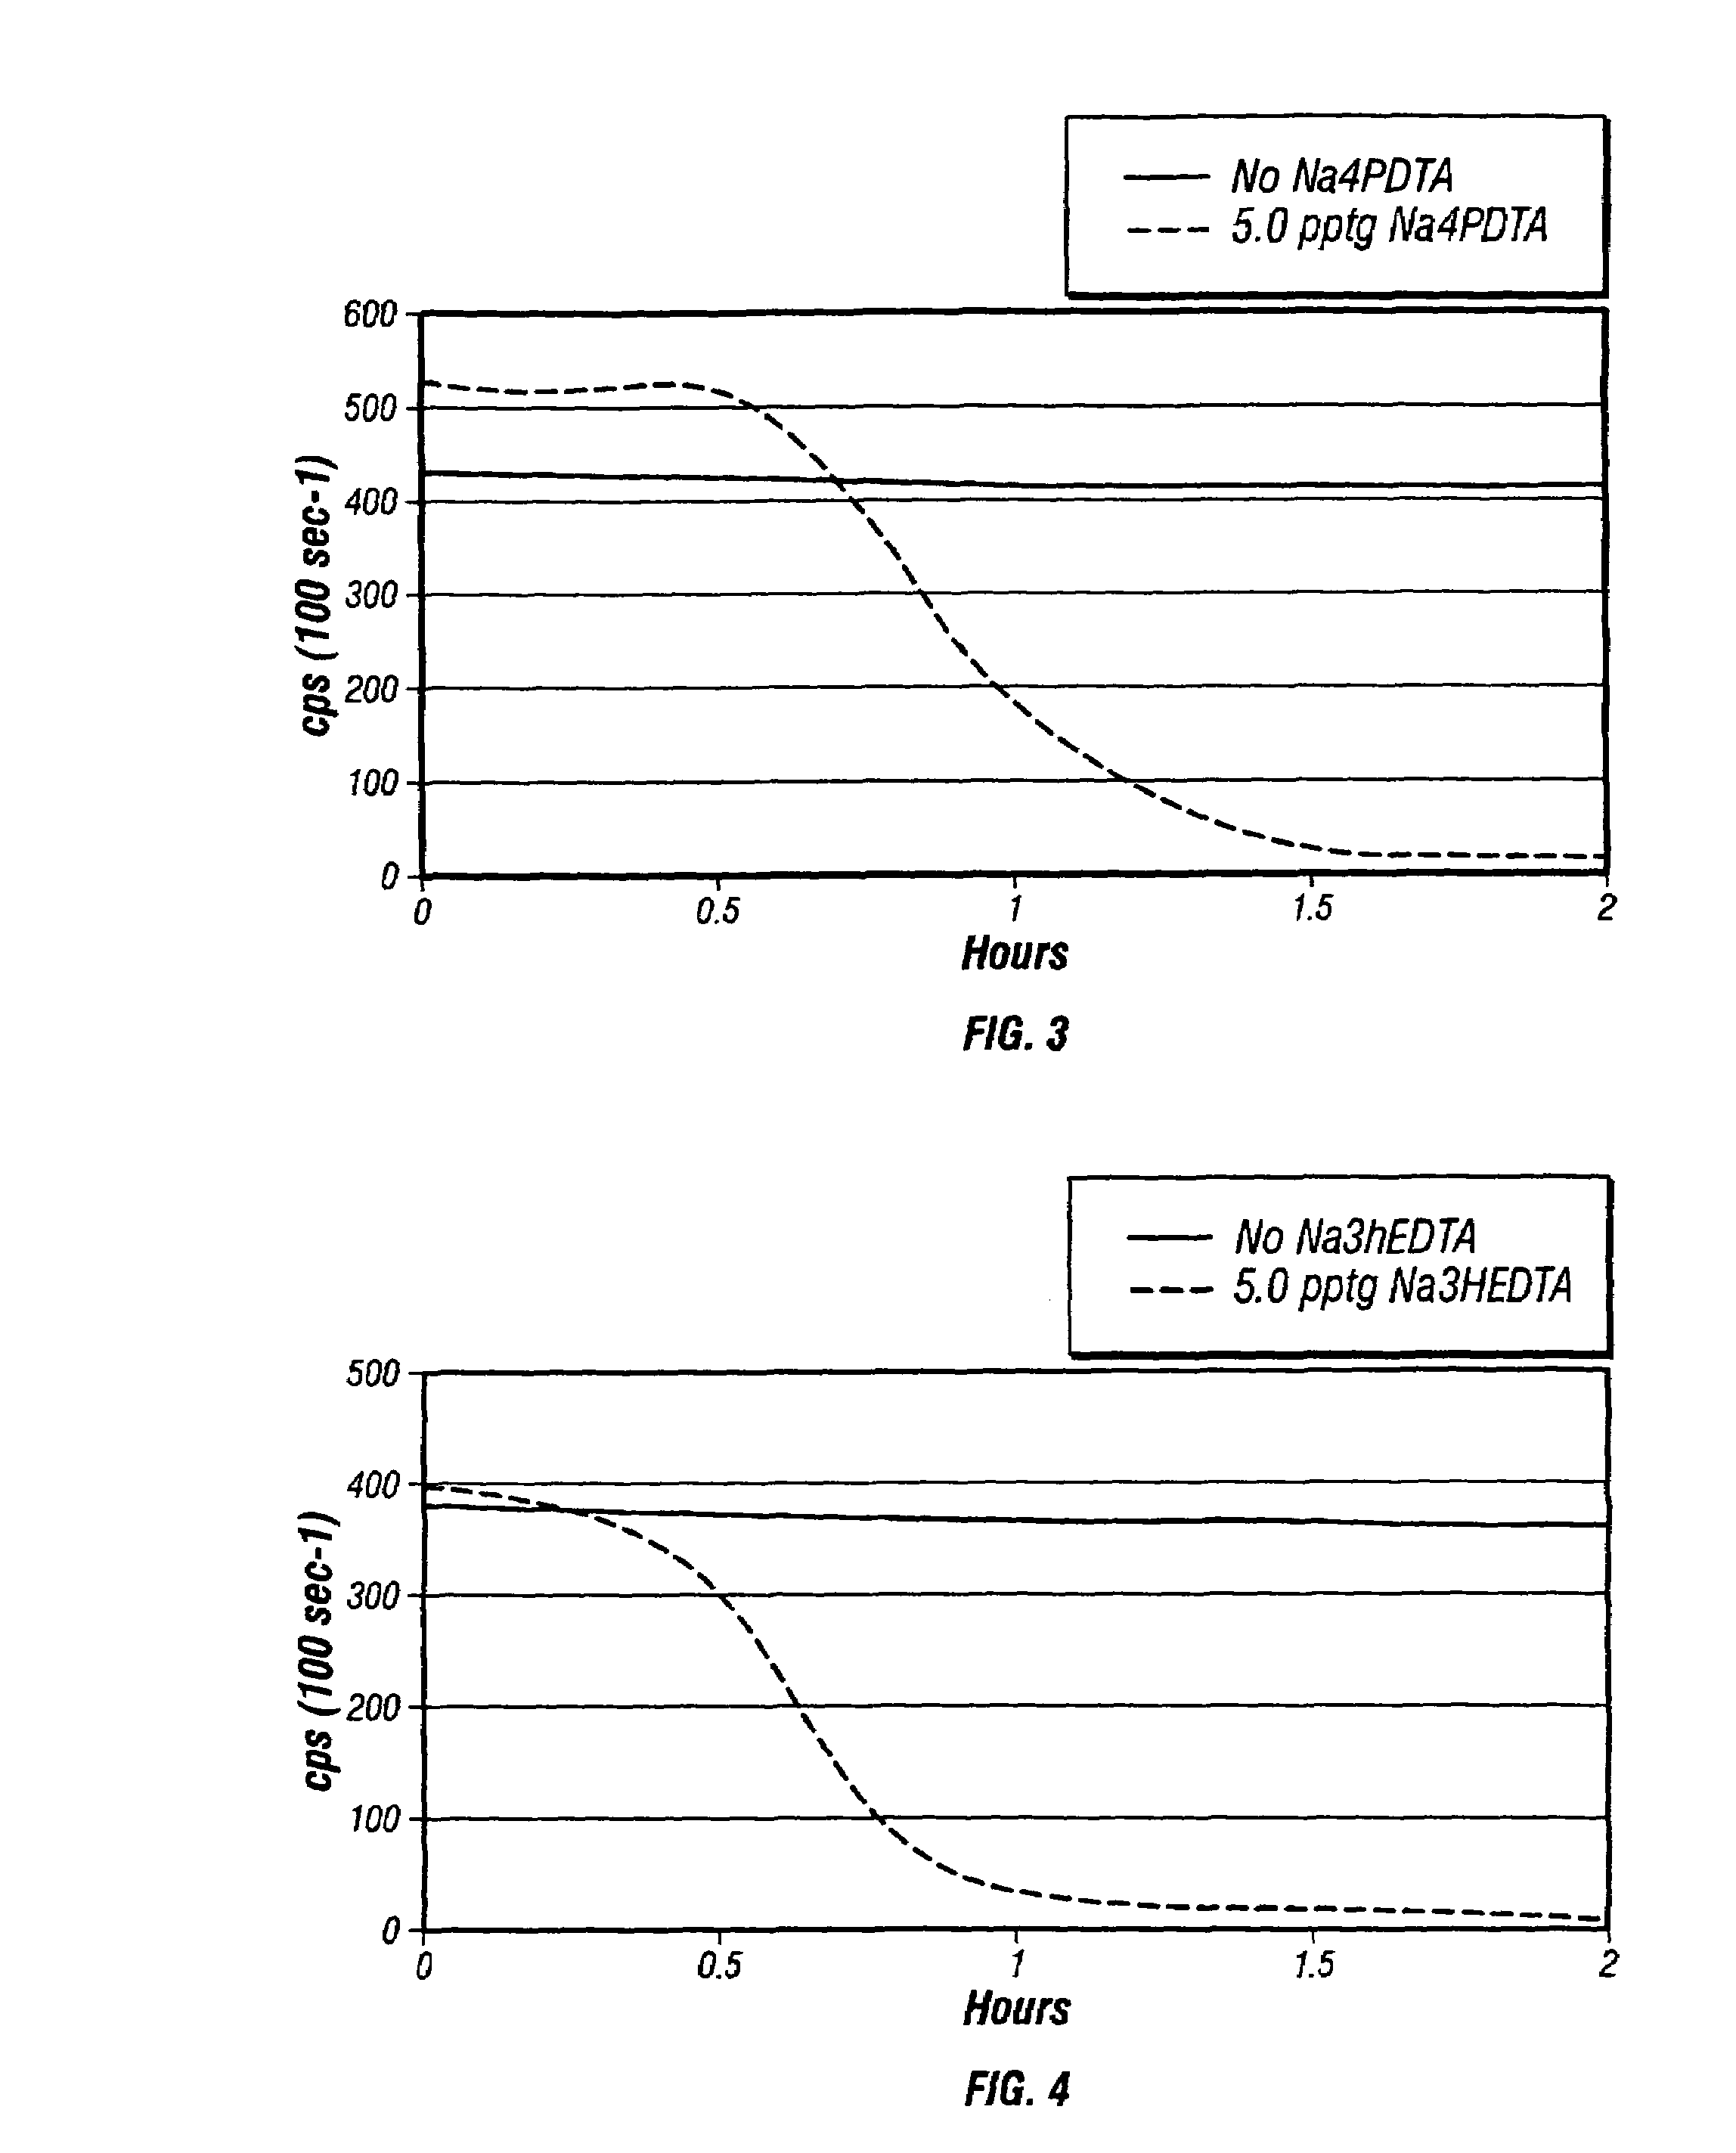 Aminocarboxylic acid breaker compositions for fracturing fluids